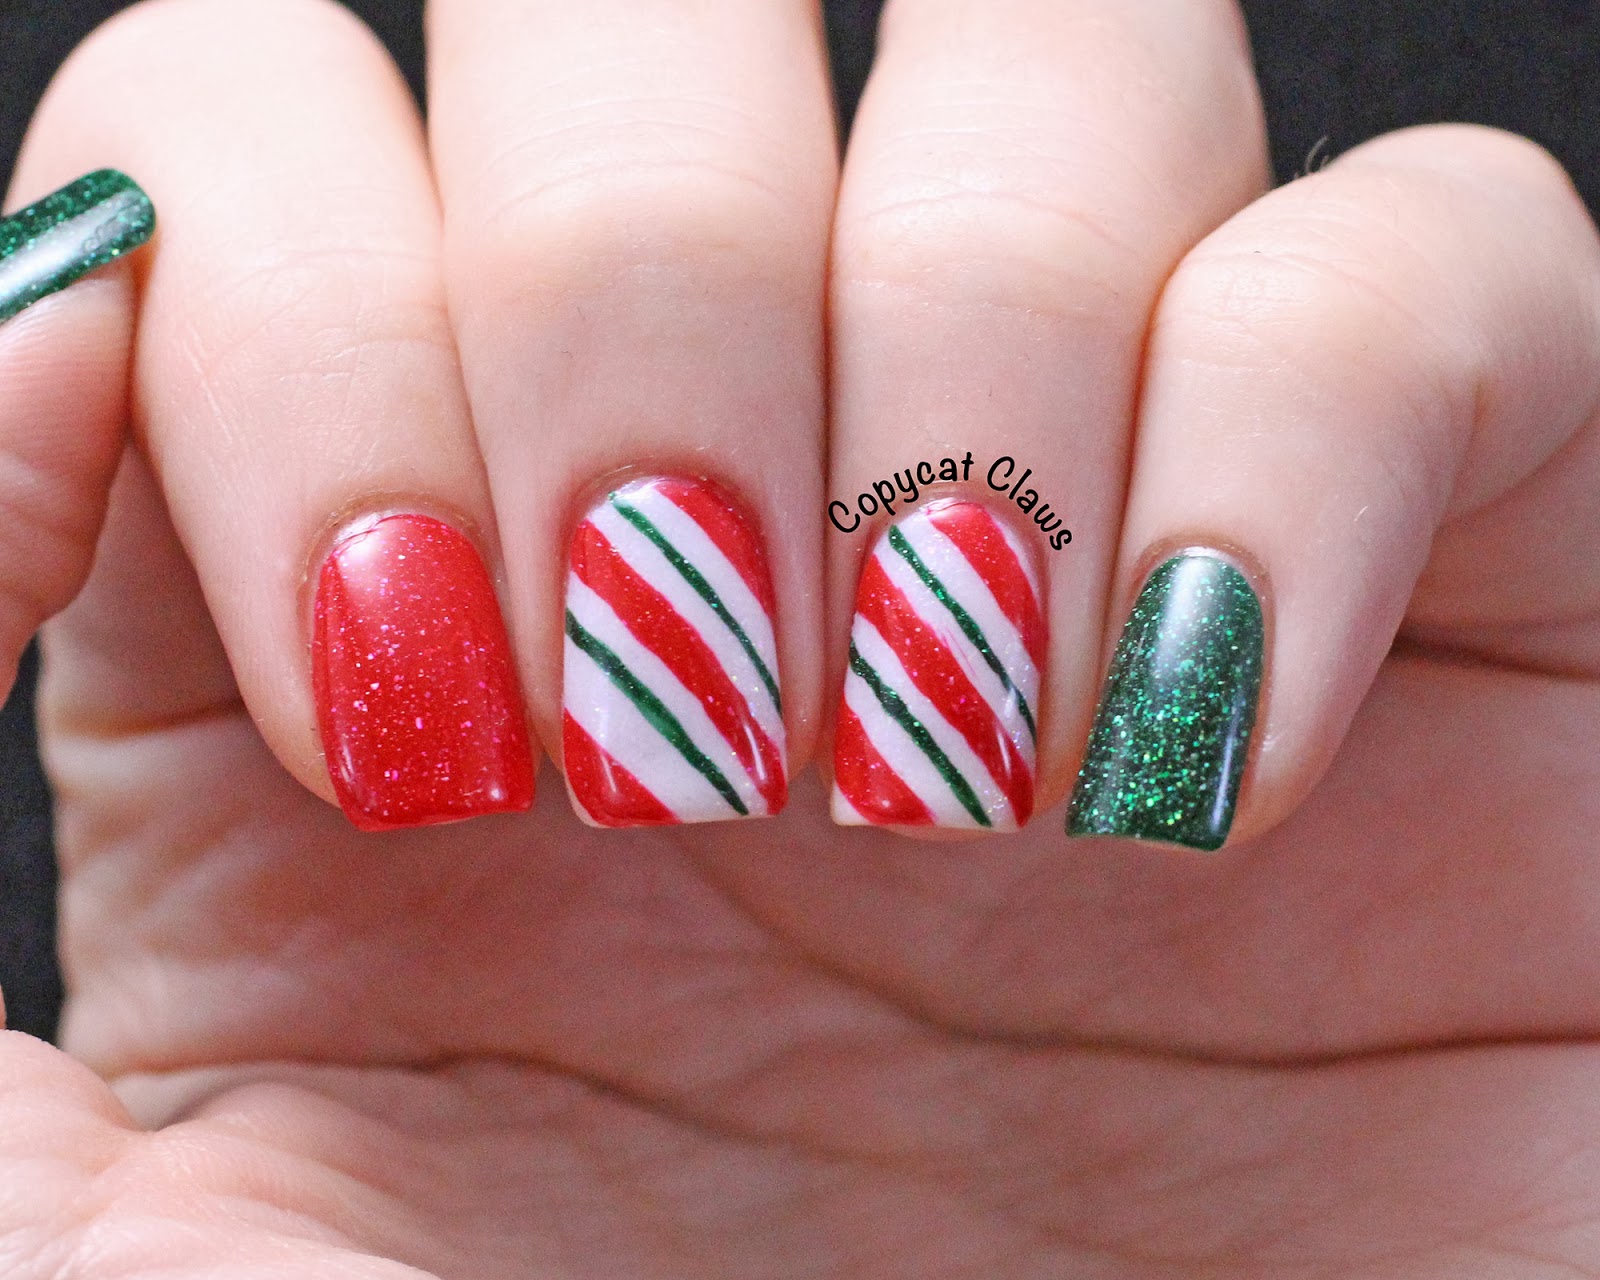 1. Candy Cane Nail Art Tutorial - wide 5